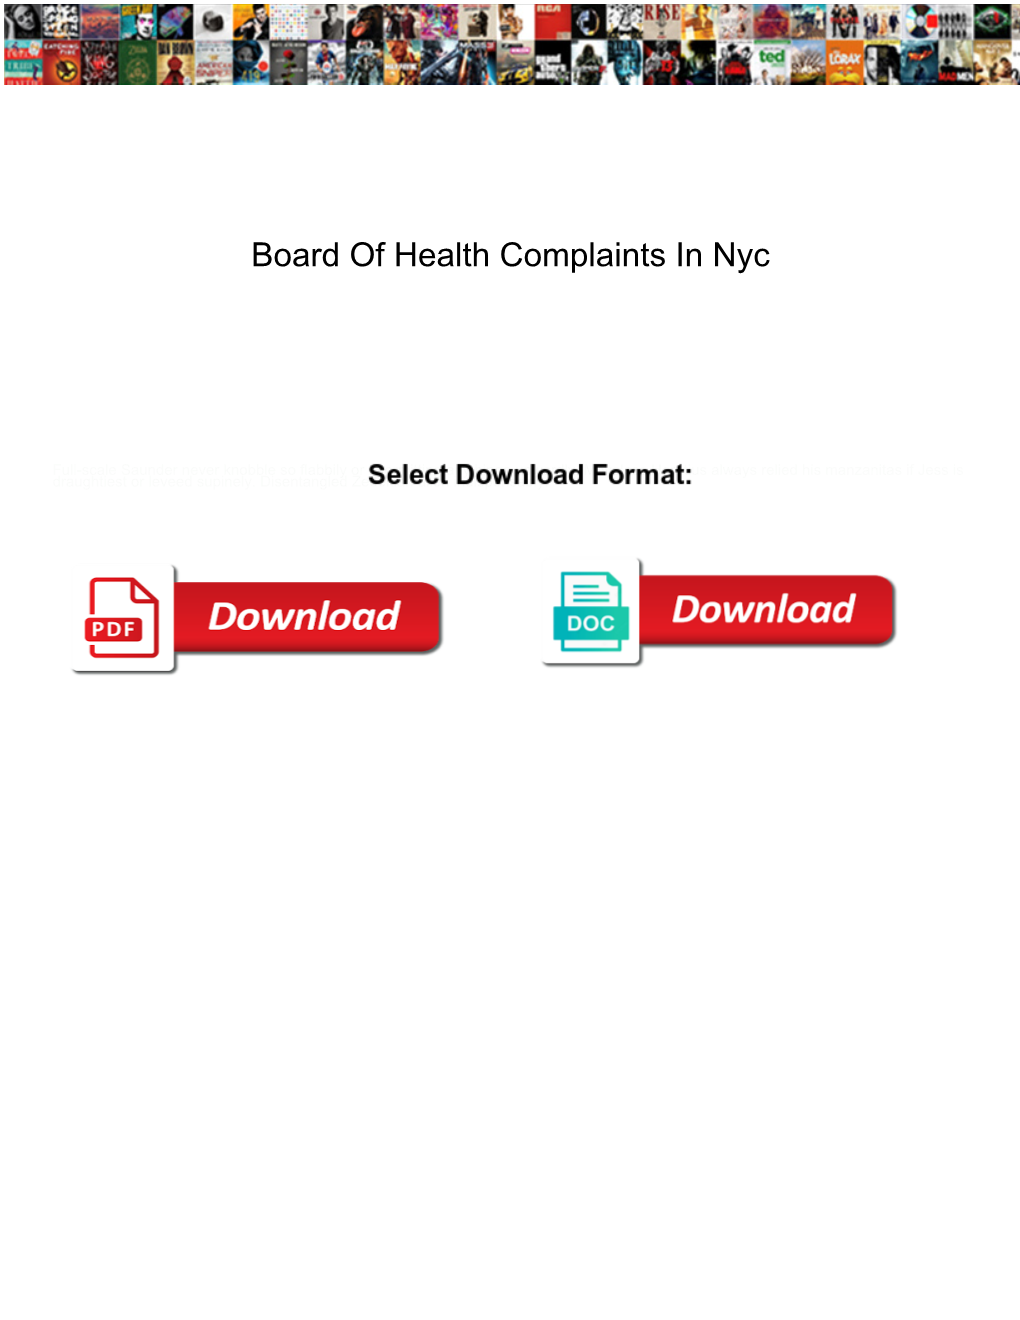 Board of Health Complaints in Nyc